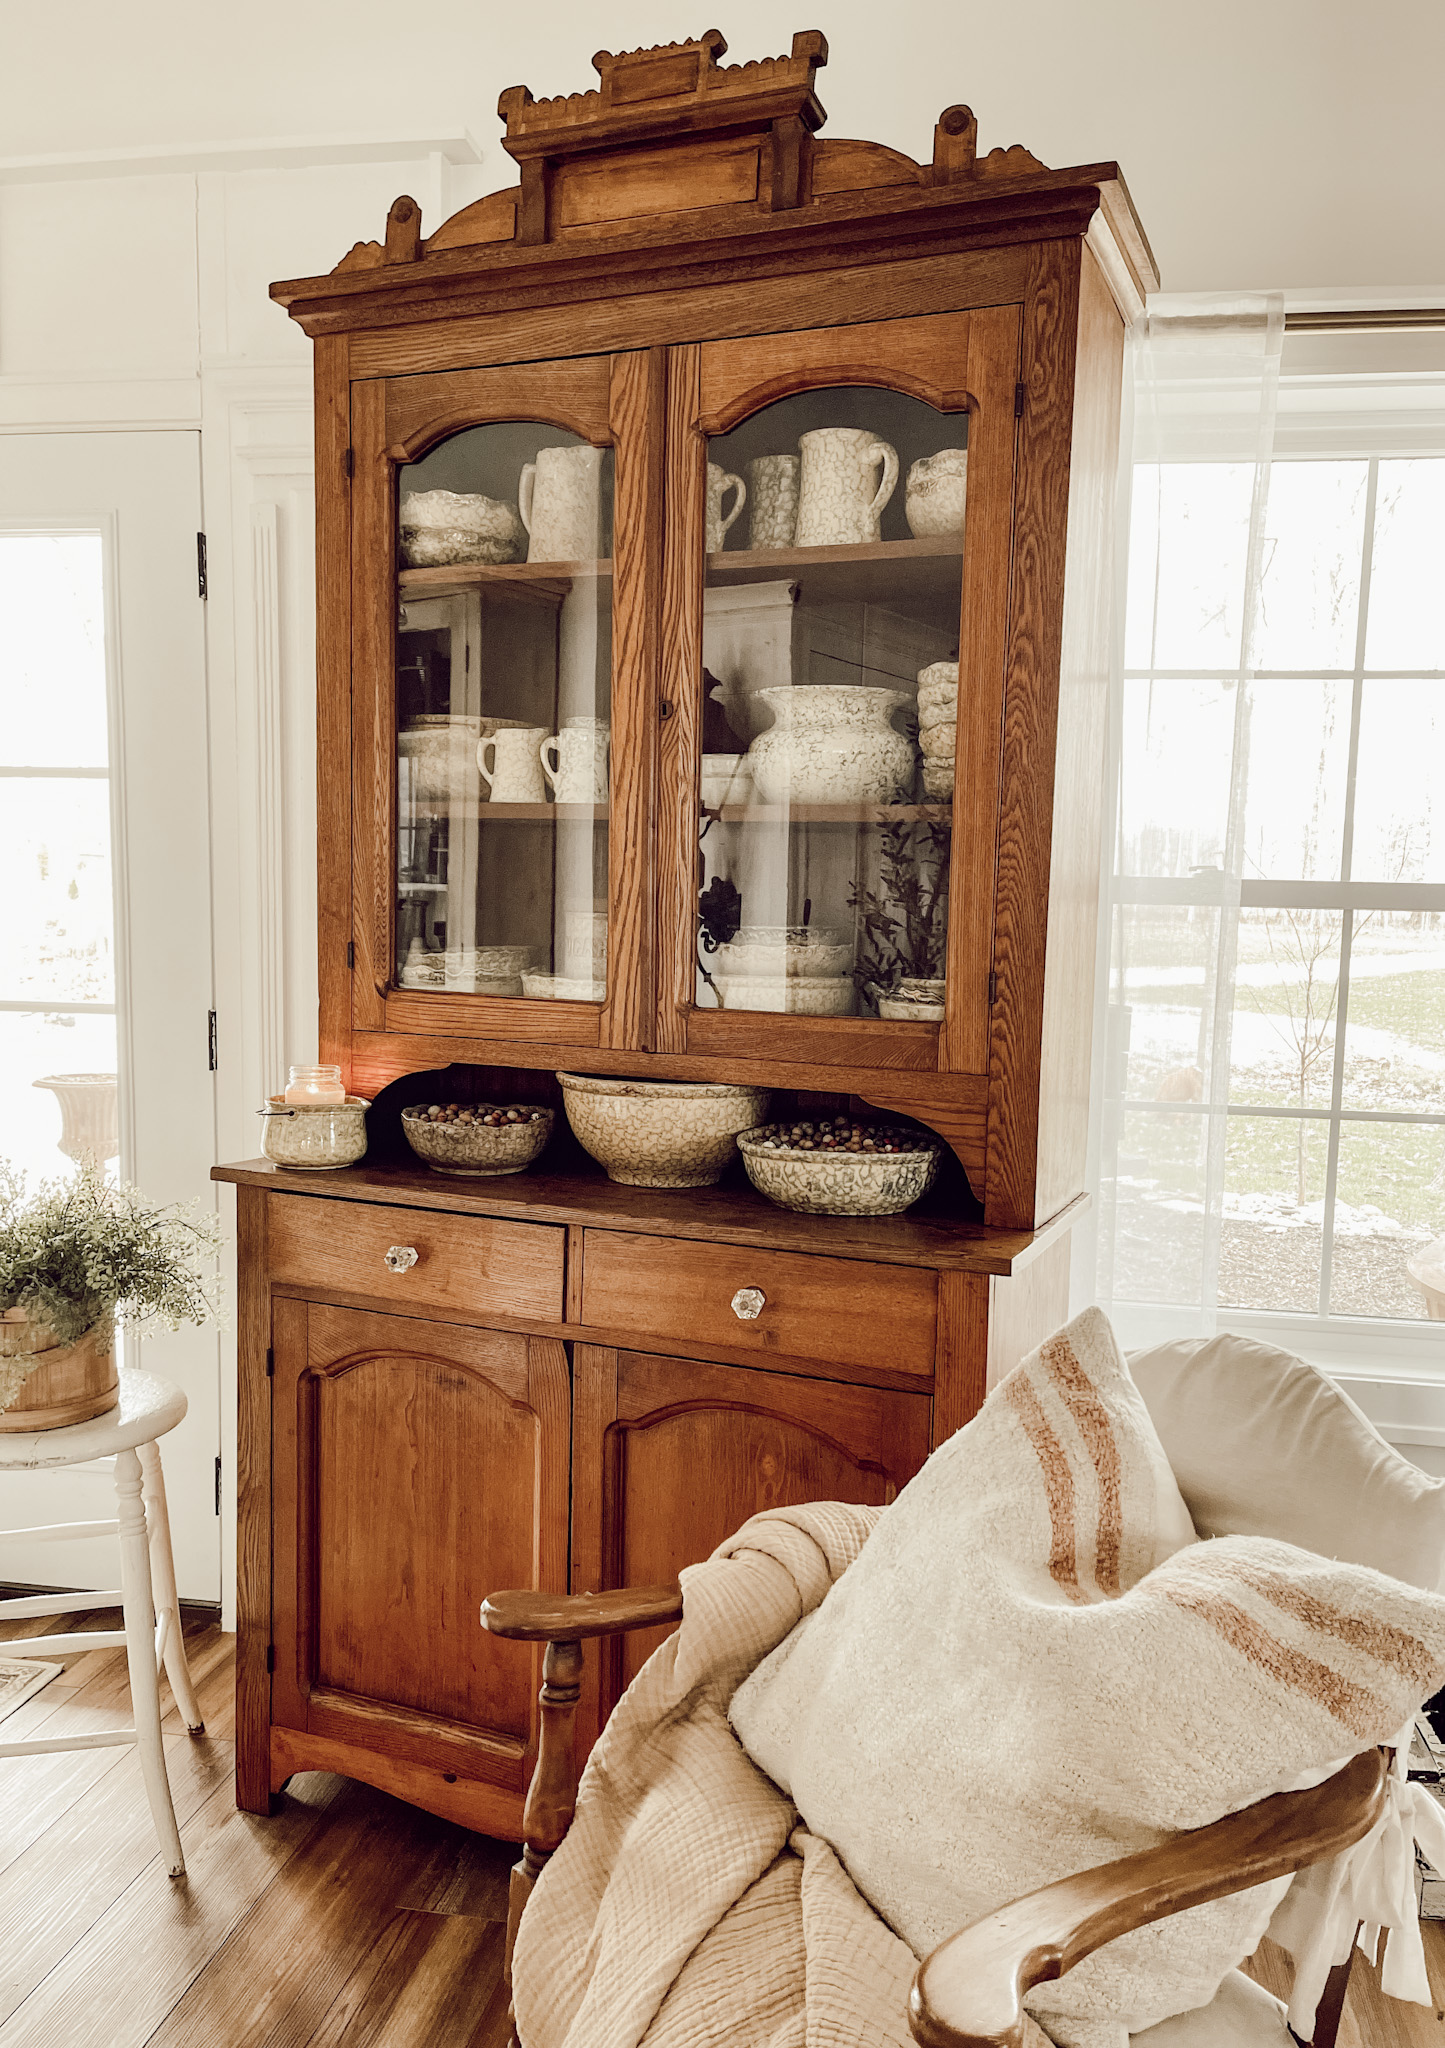 East Lake Antique Cabinet - Deb and Danelle